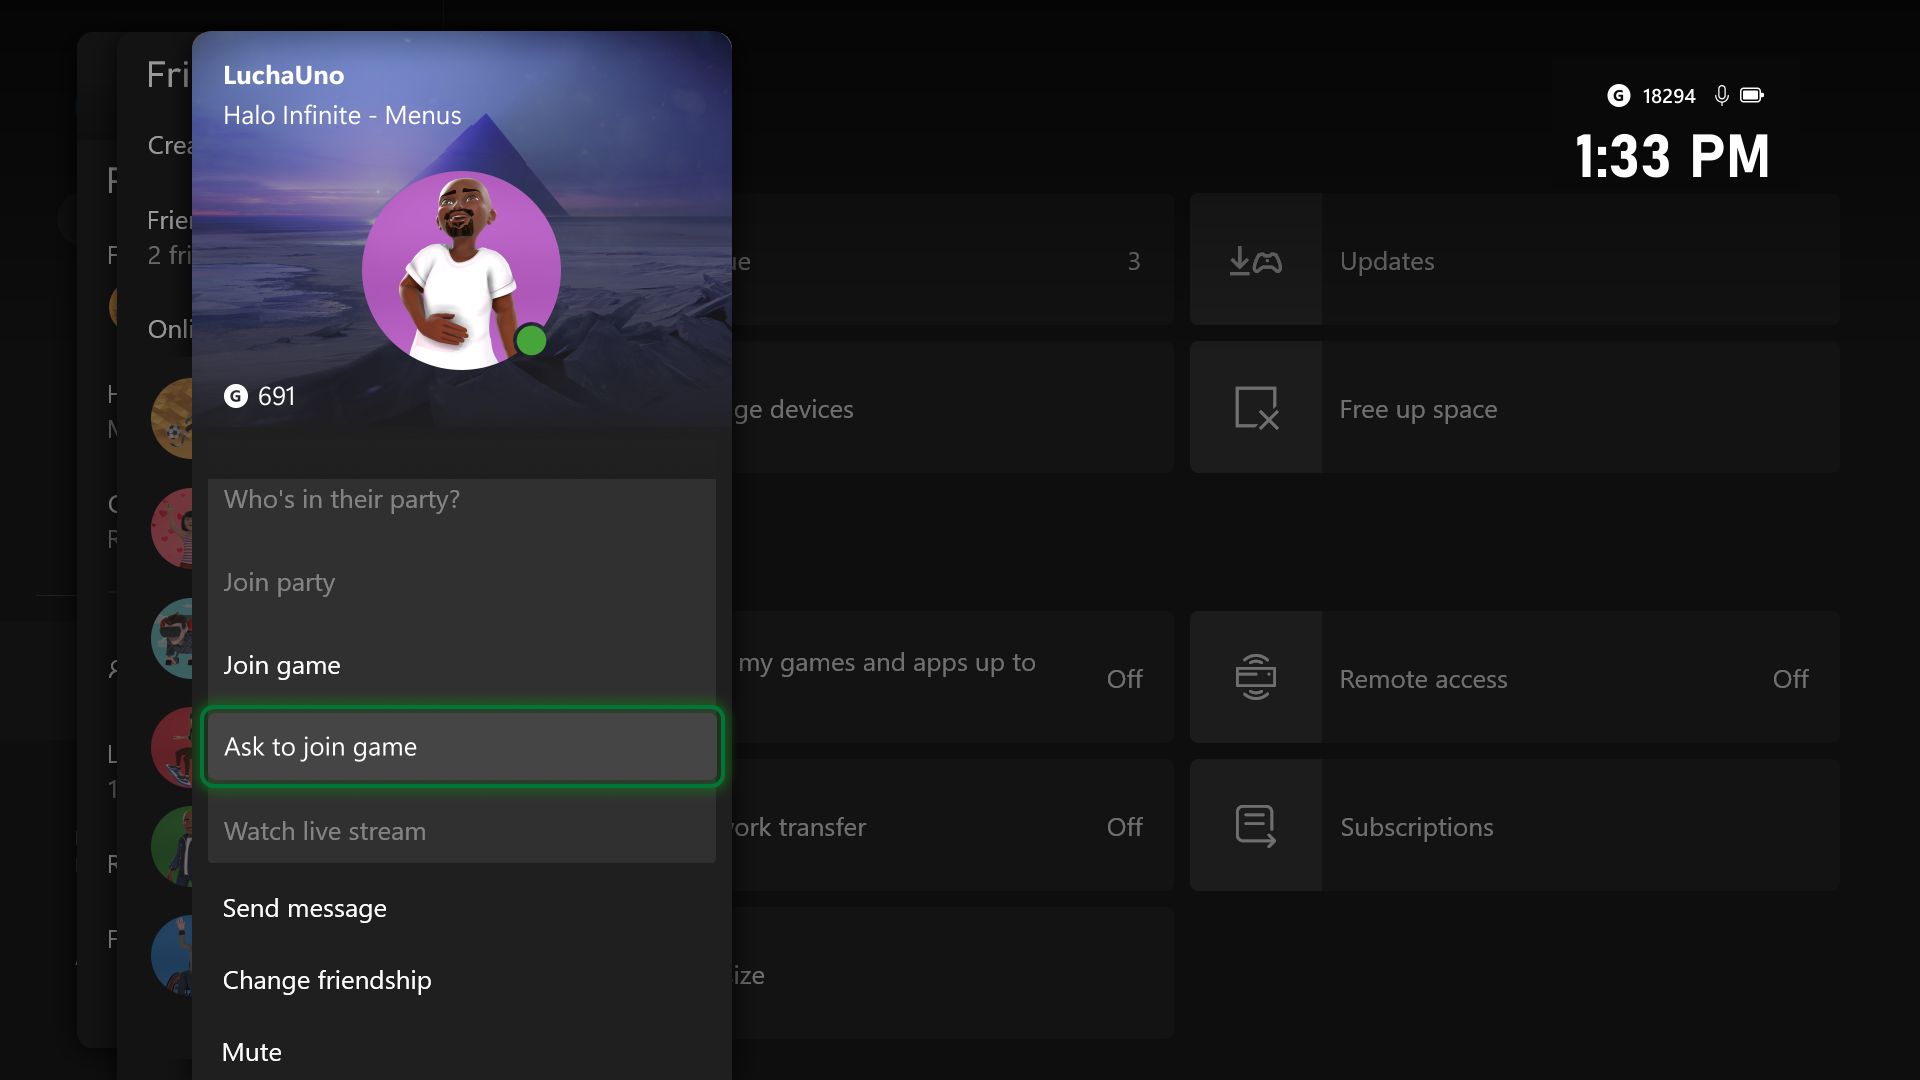 November 2019 Xbox One Update Brings Xbox Action for the Google Assistant,  Gamertag Updates, Text Filters and More - Xbox Wire